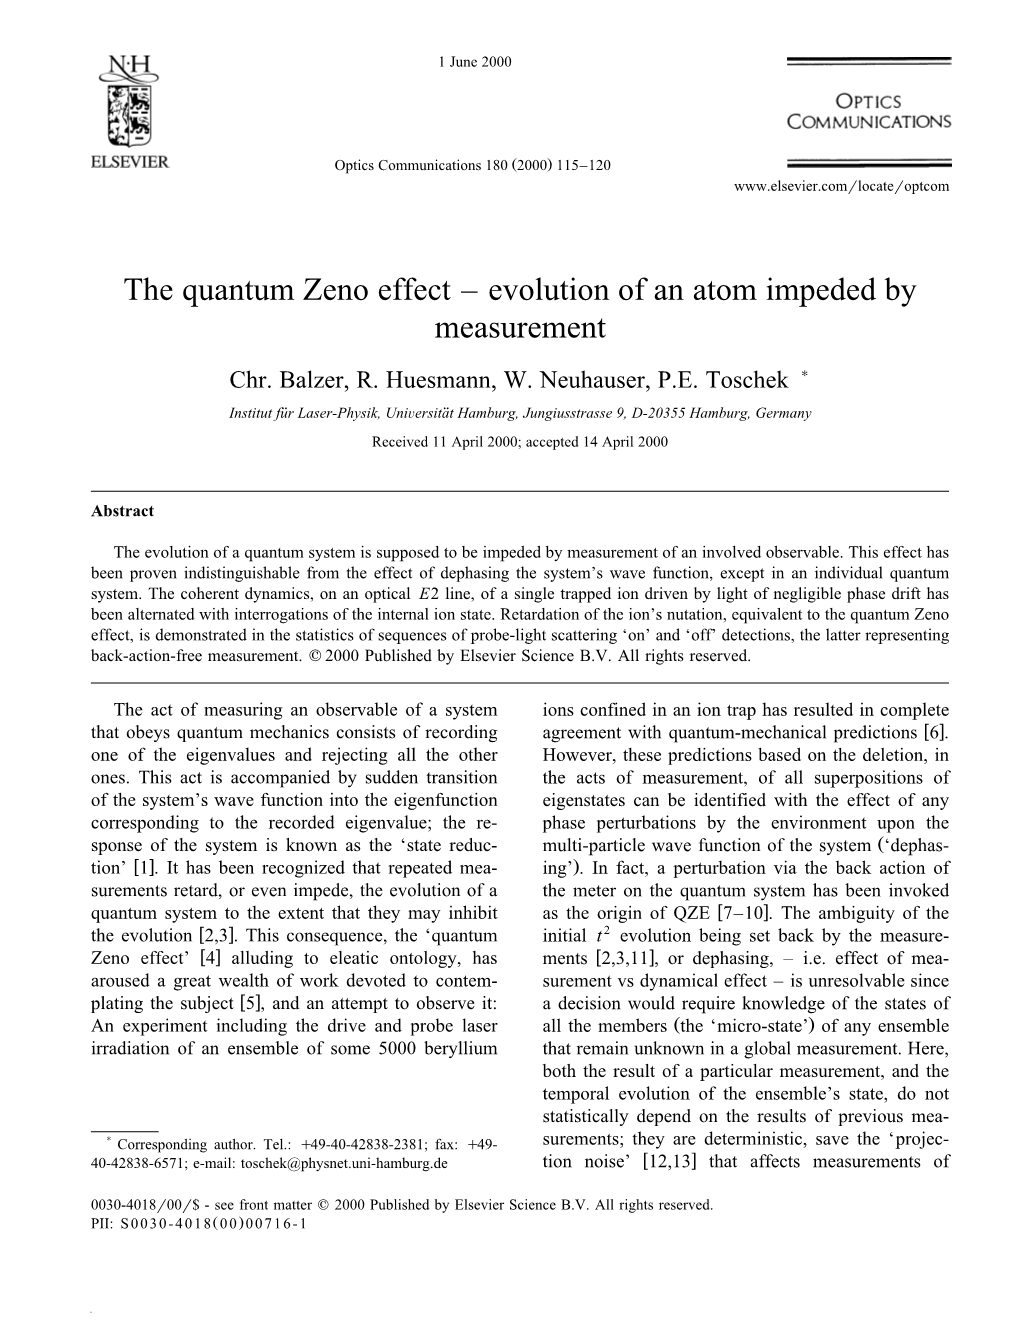 The Quantum Zeno Effect – Evolution of an Atom Impeded by Measurement